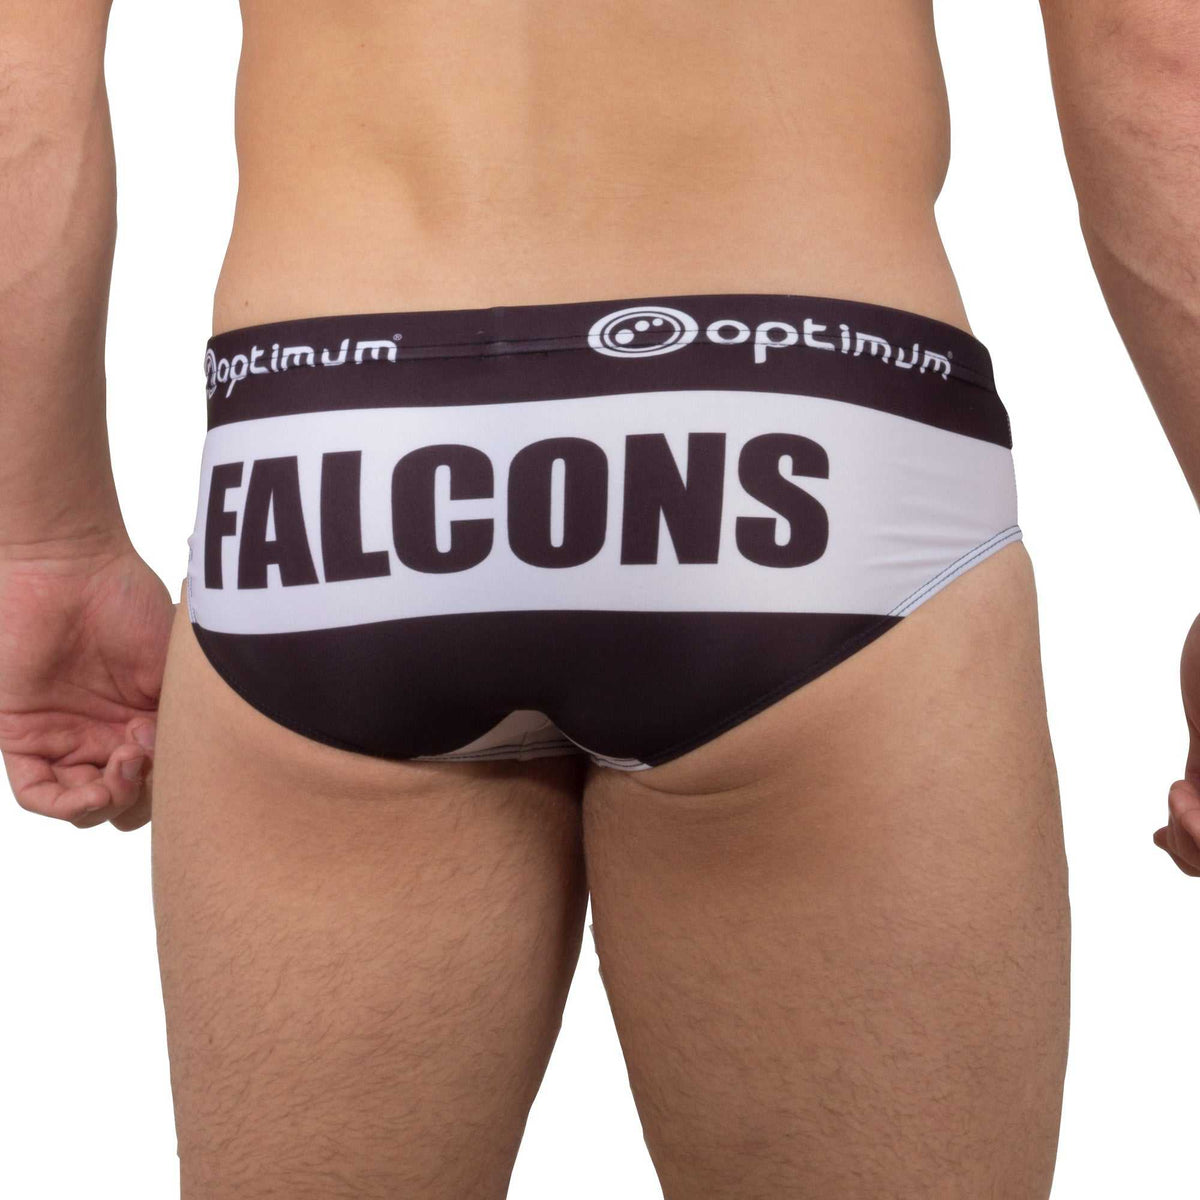 Falcons Tackle Trunks Rugby Union - Optimum